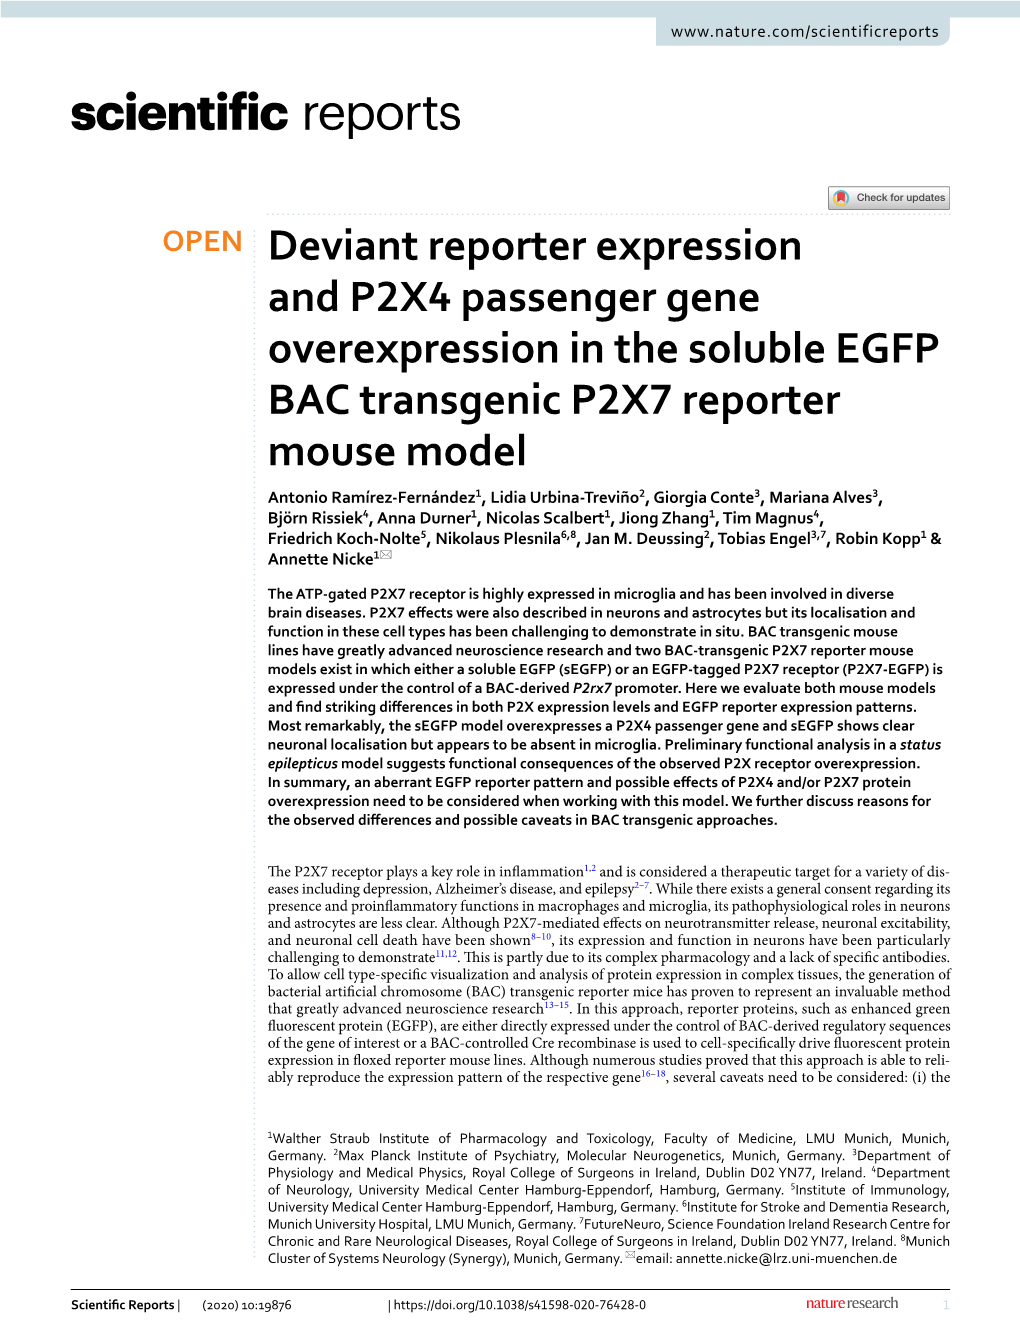 Deviant Reporter Expression and P2X4 Passenger Gene Overexpression In